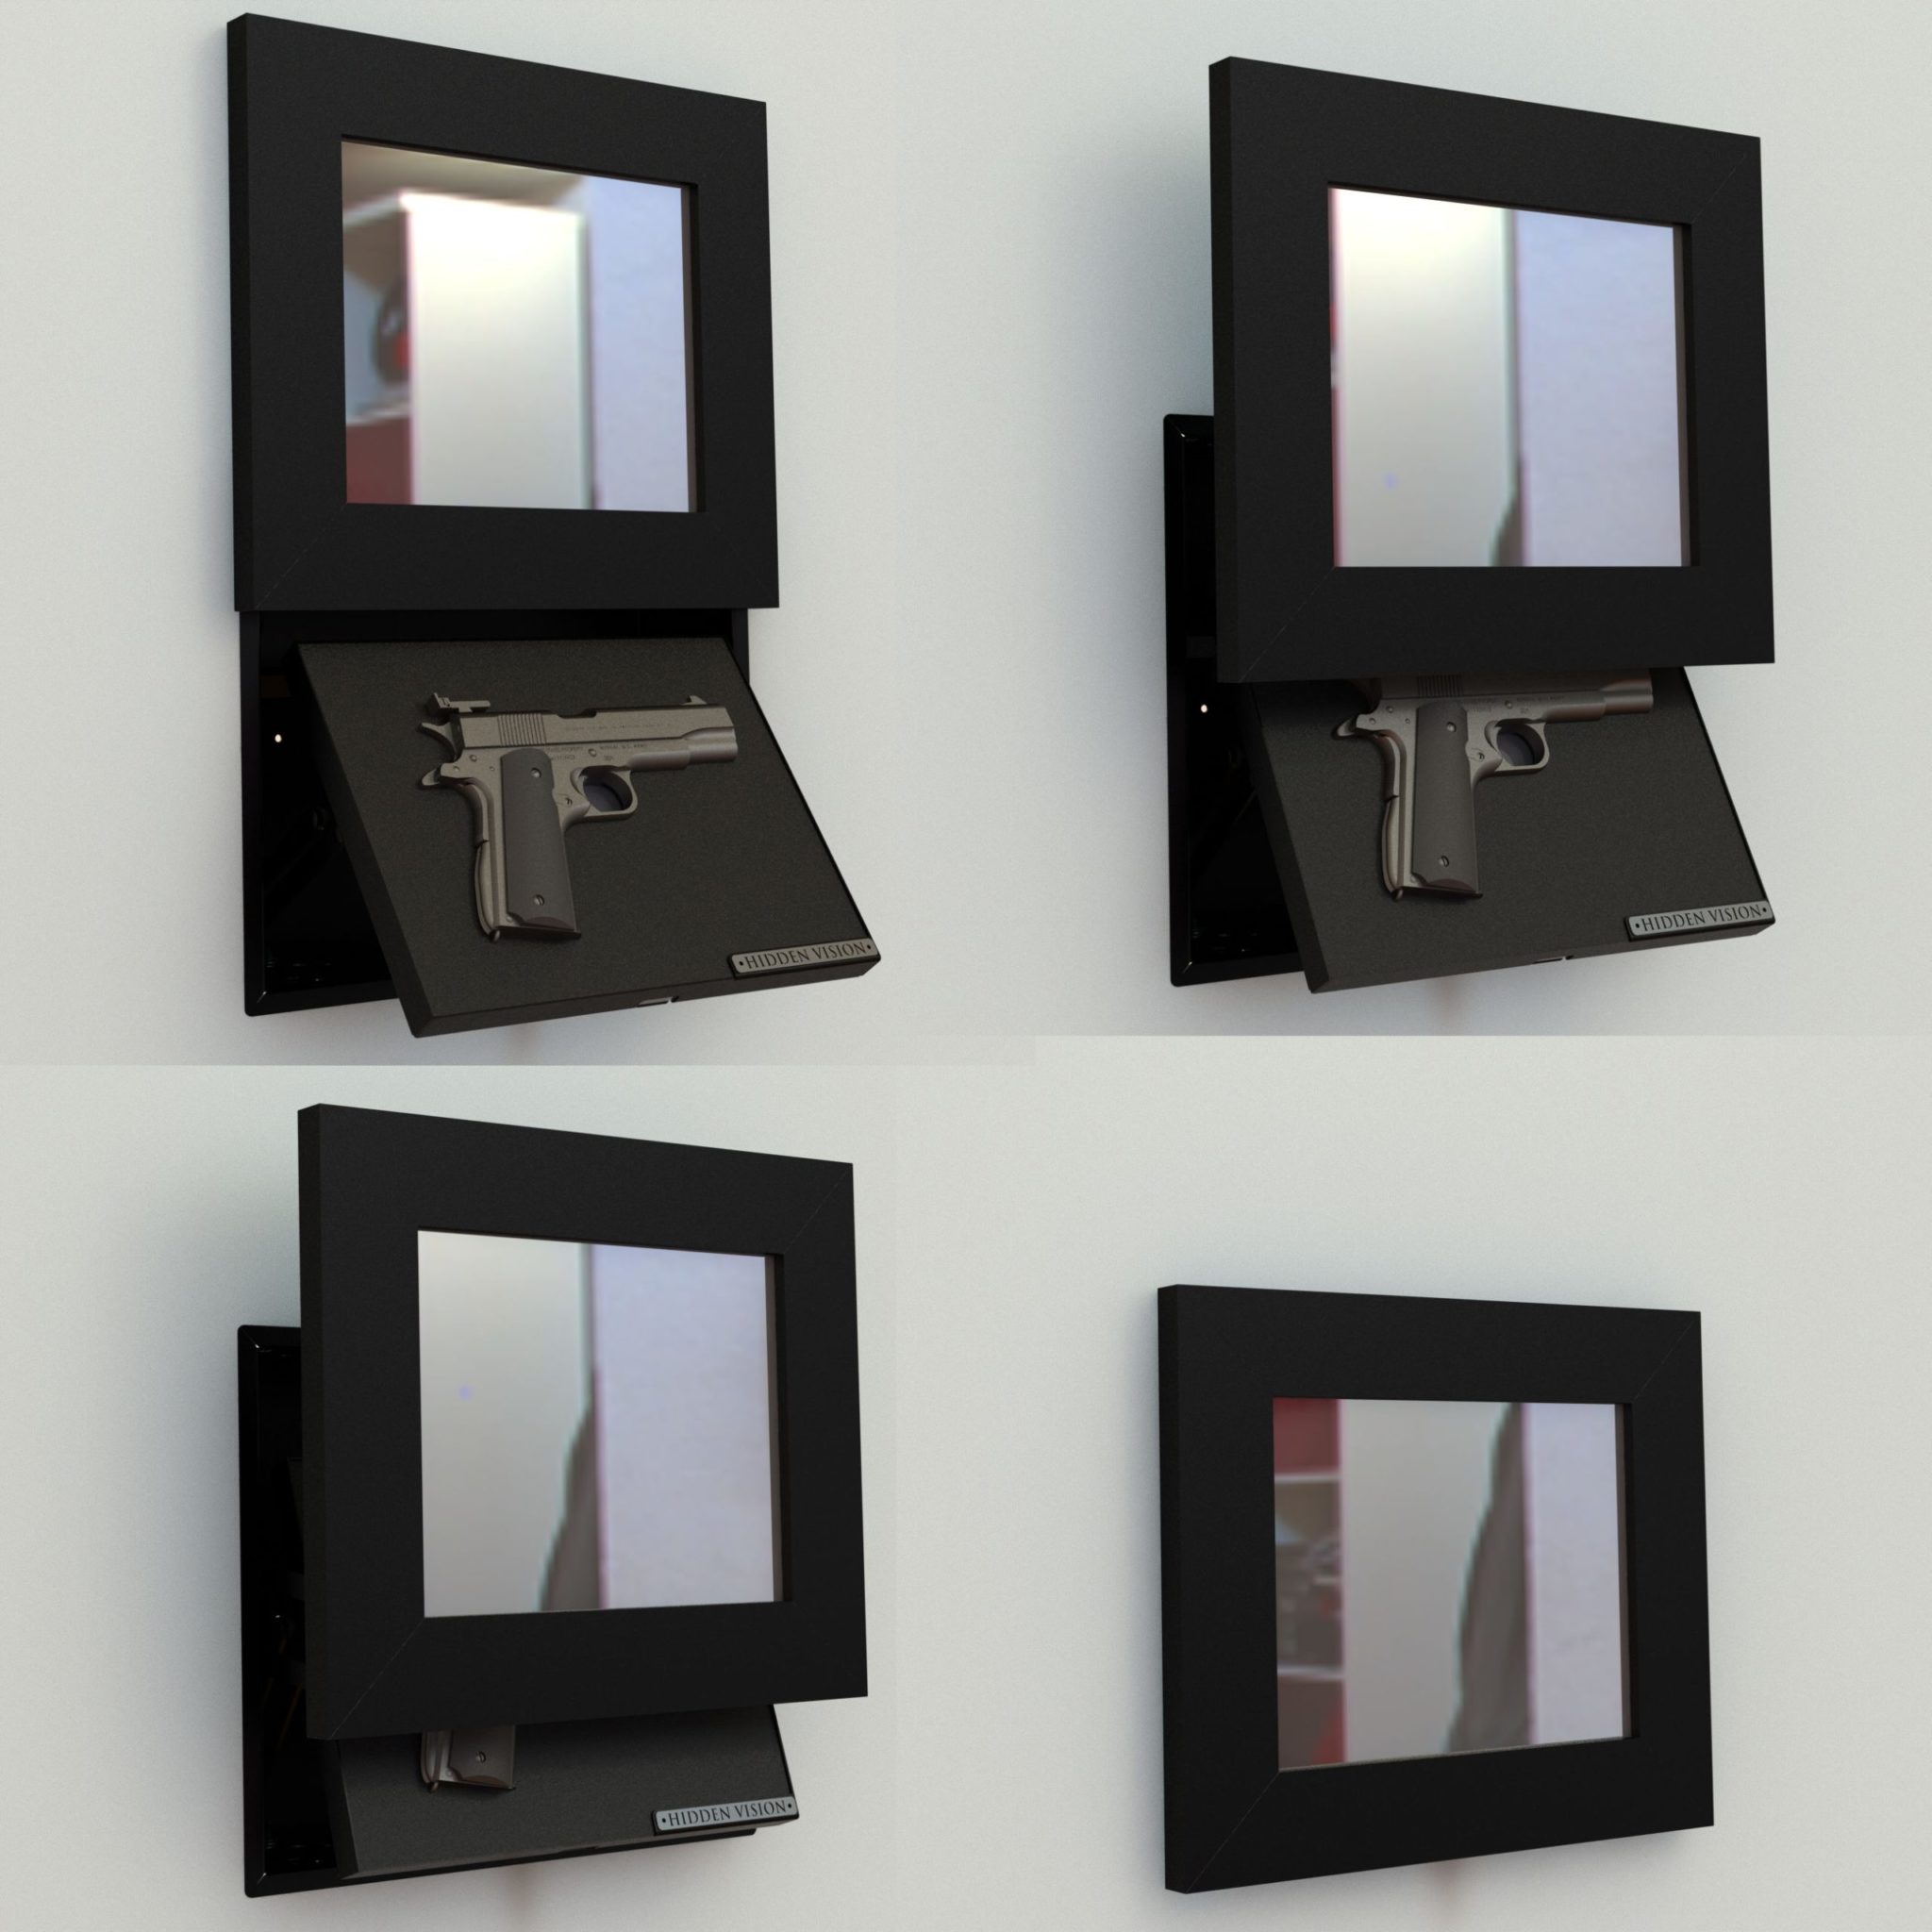 Hidden Storage Photo Frame for Gun and Valuables 15-1/2 x 13-1/2 Magnetic Lock 